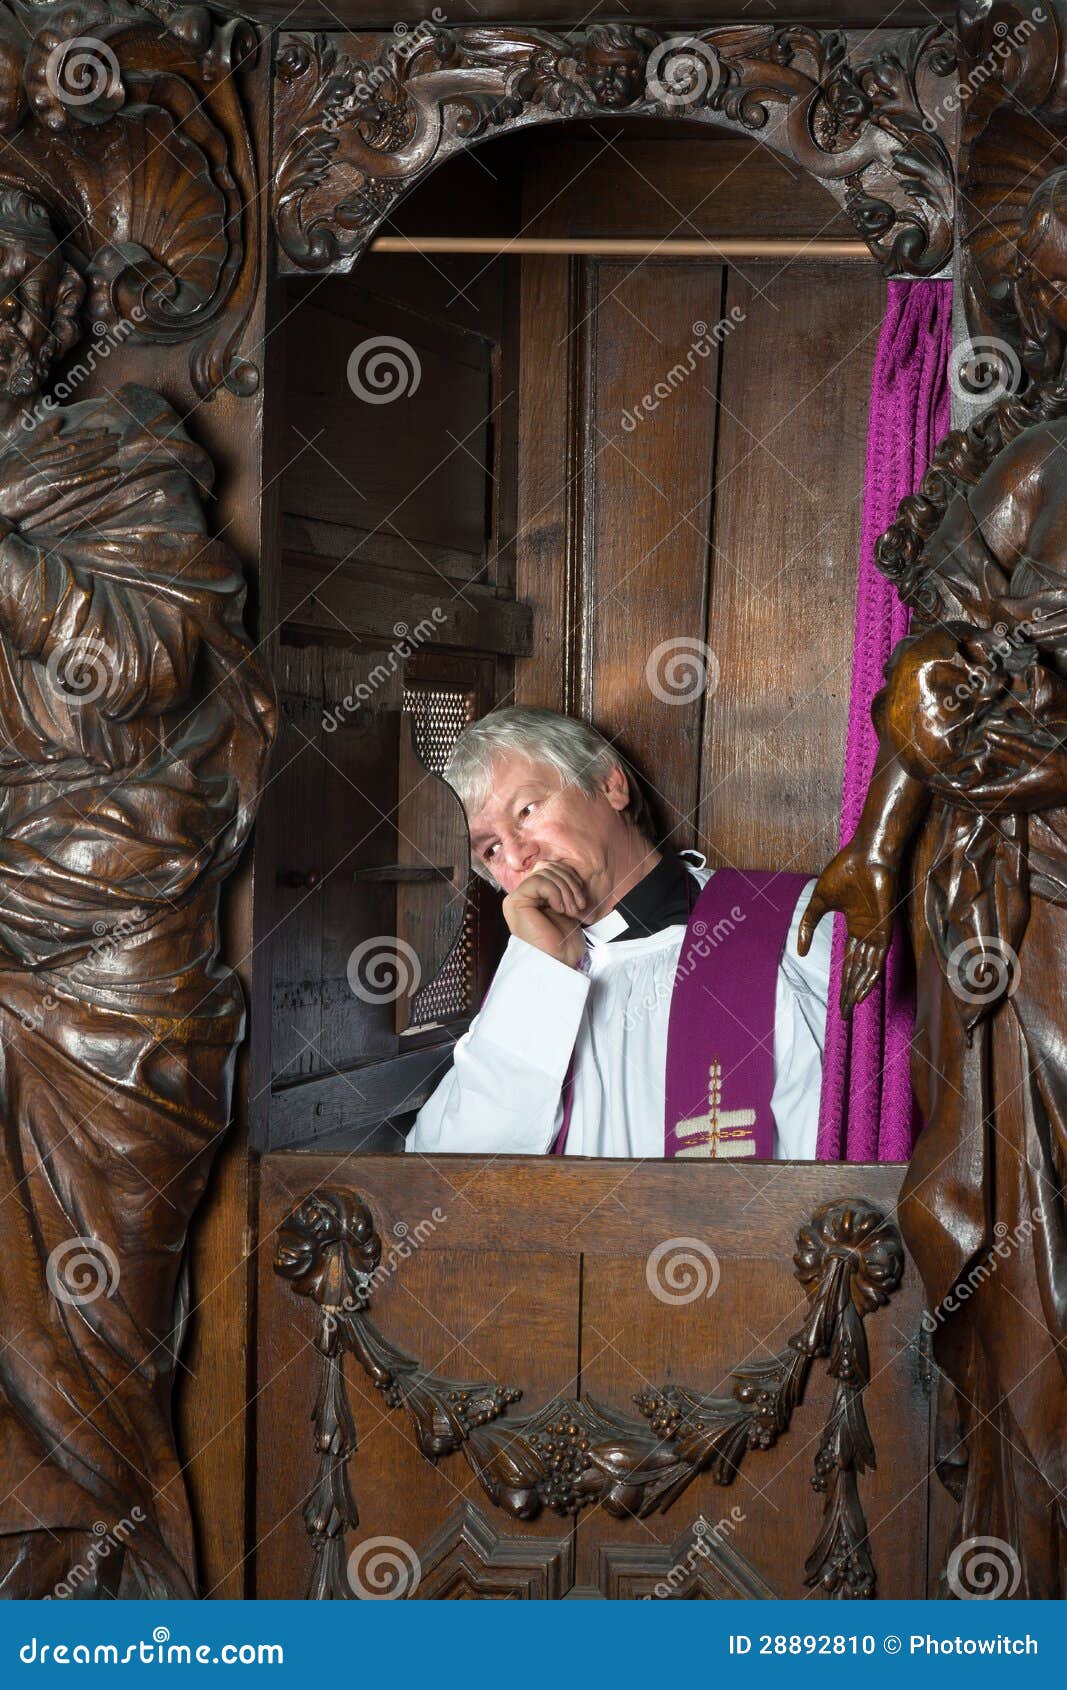 priest in confession booth